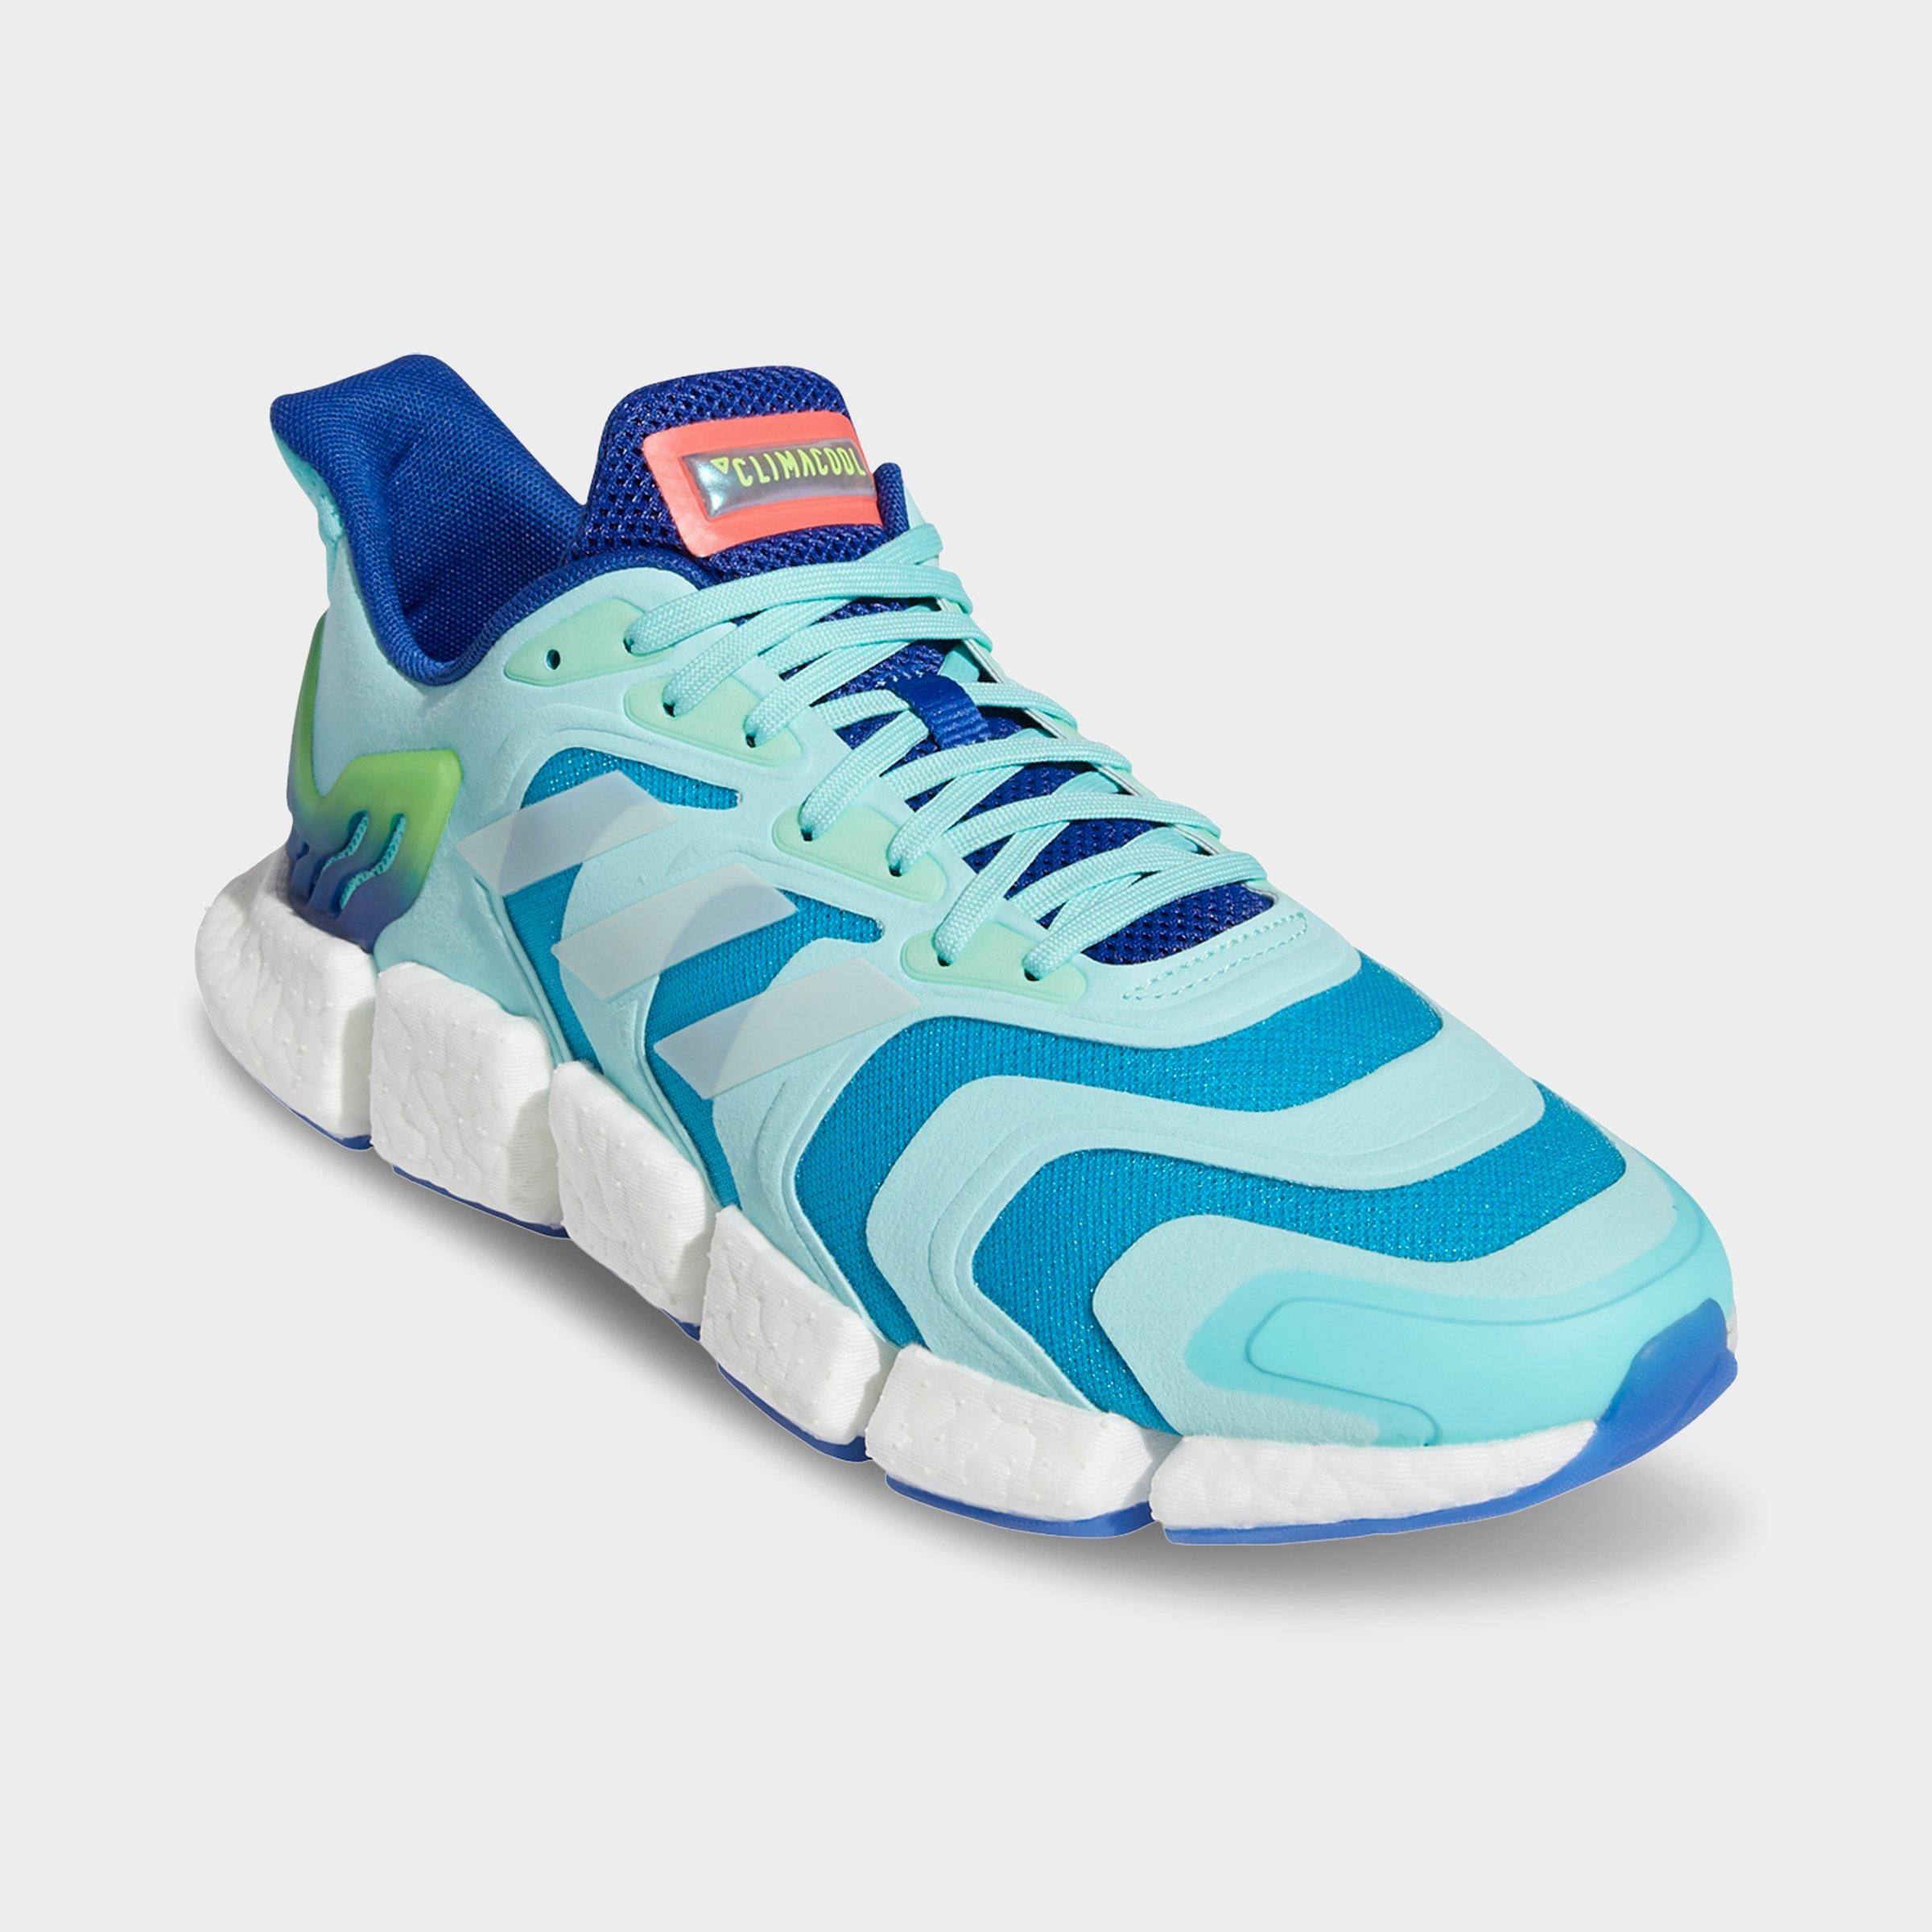 adidas climacool tennis shoes